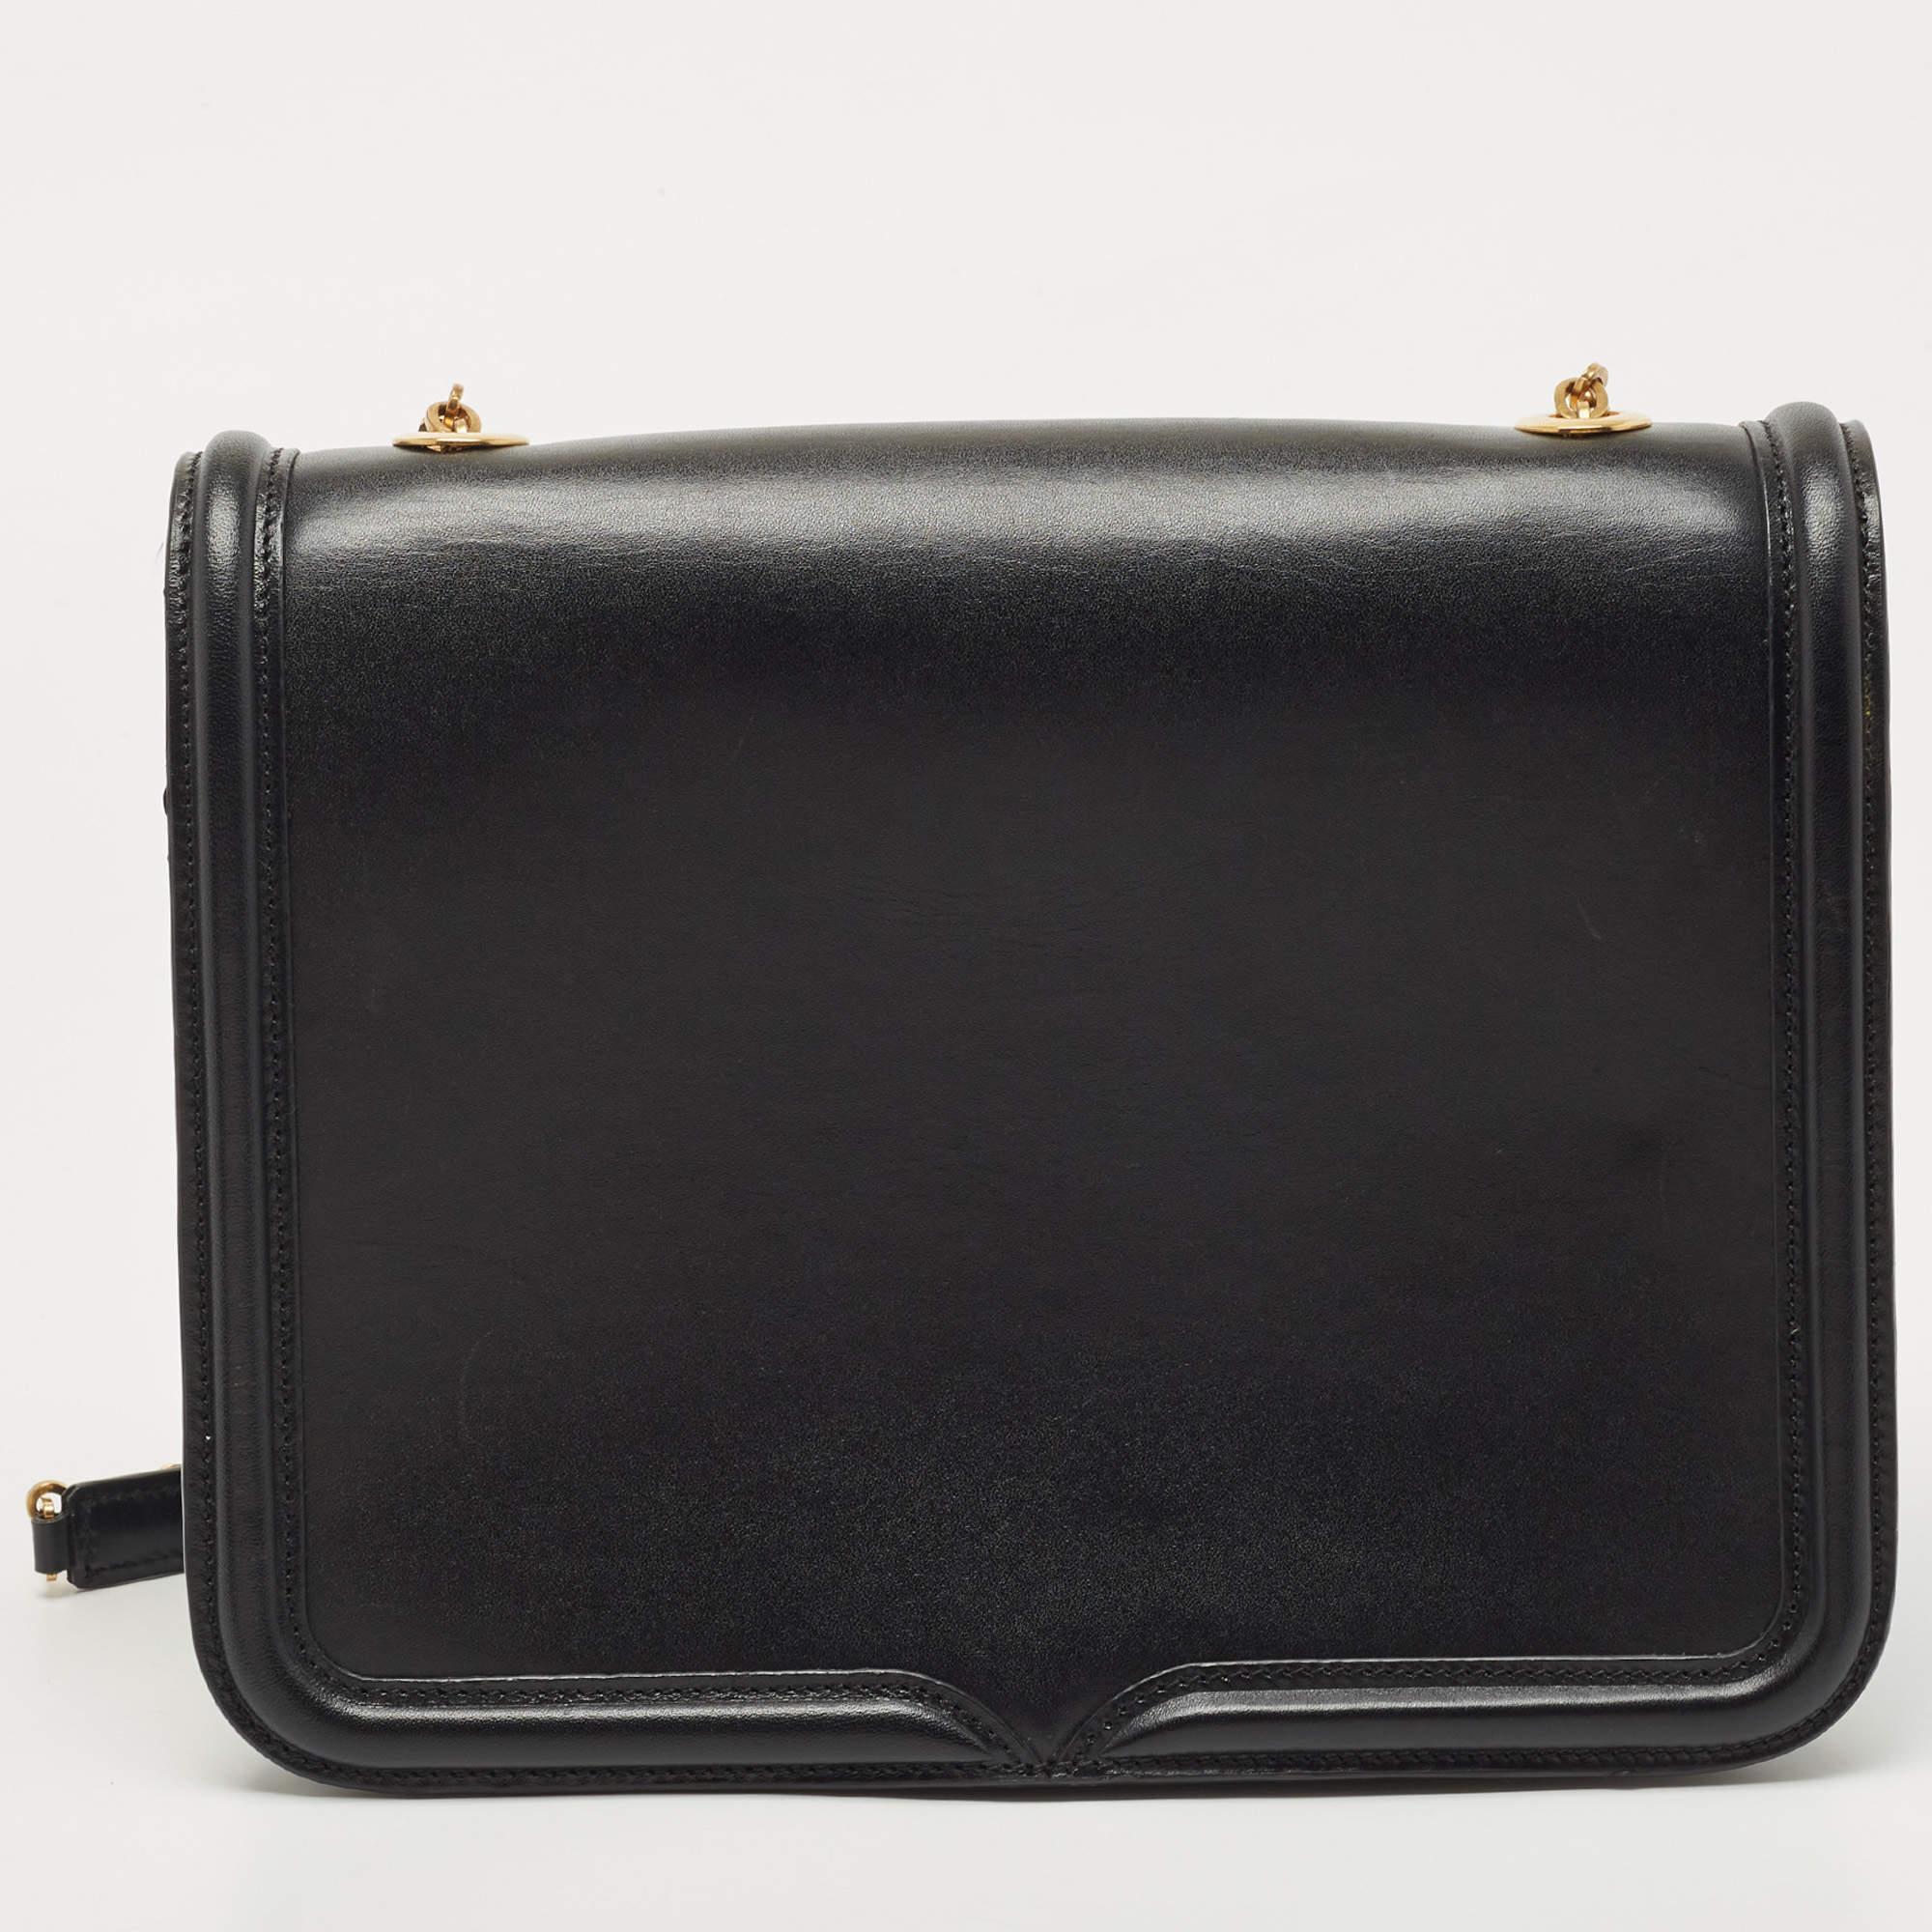 For a look that is complete with style, taste, and a touch of luxe, this shoulder bag is the perfect addition. Flaunt this beauty on your shoulder at any event and revel in the taste of luxury it leaves you with.

Includes: Original Dustbag